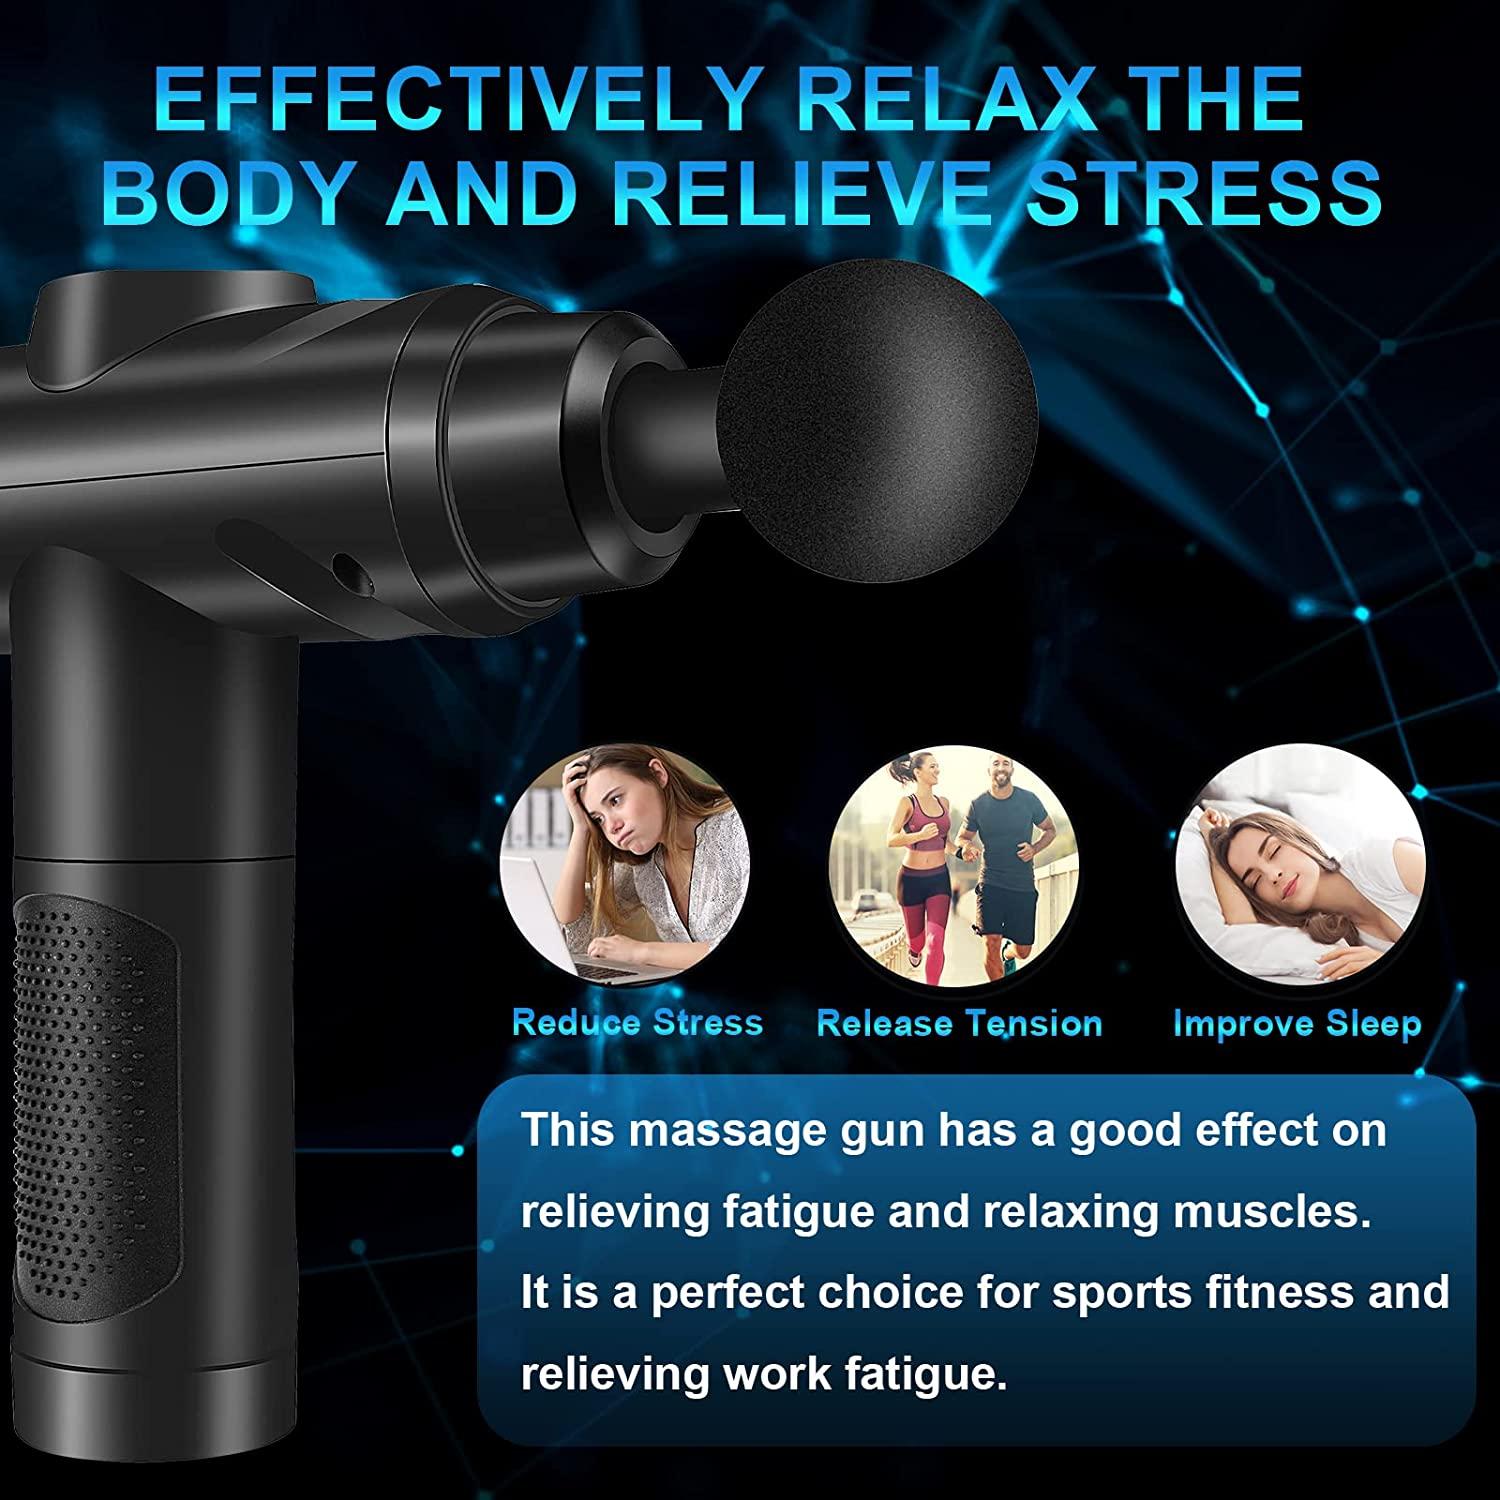  30 Gears LCD Touch Screen High Frequency Massage Gun Muscle  Relax Body Relaxation Electric Massager with Portable Bag 6 Heads-20  Gears-Carbon Black : Health & Household